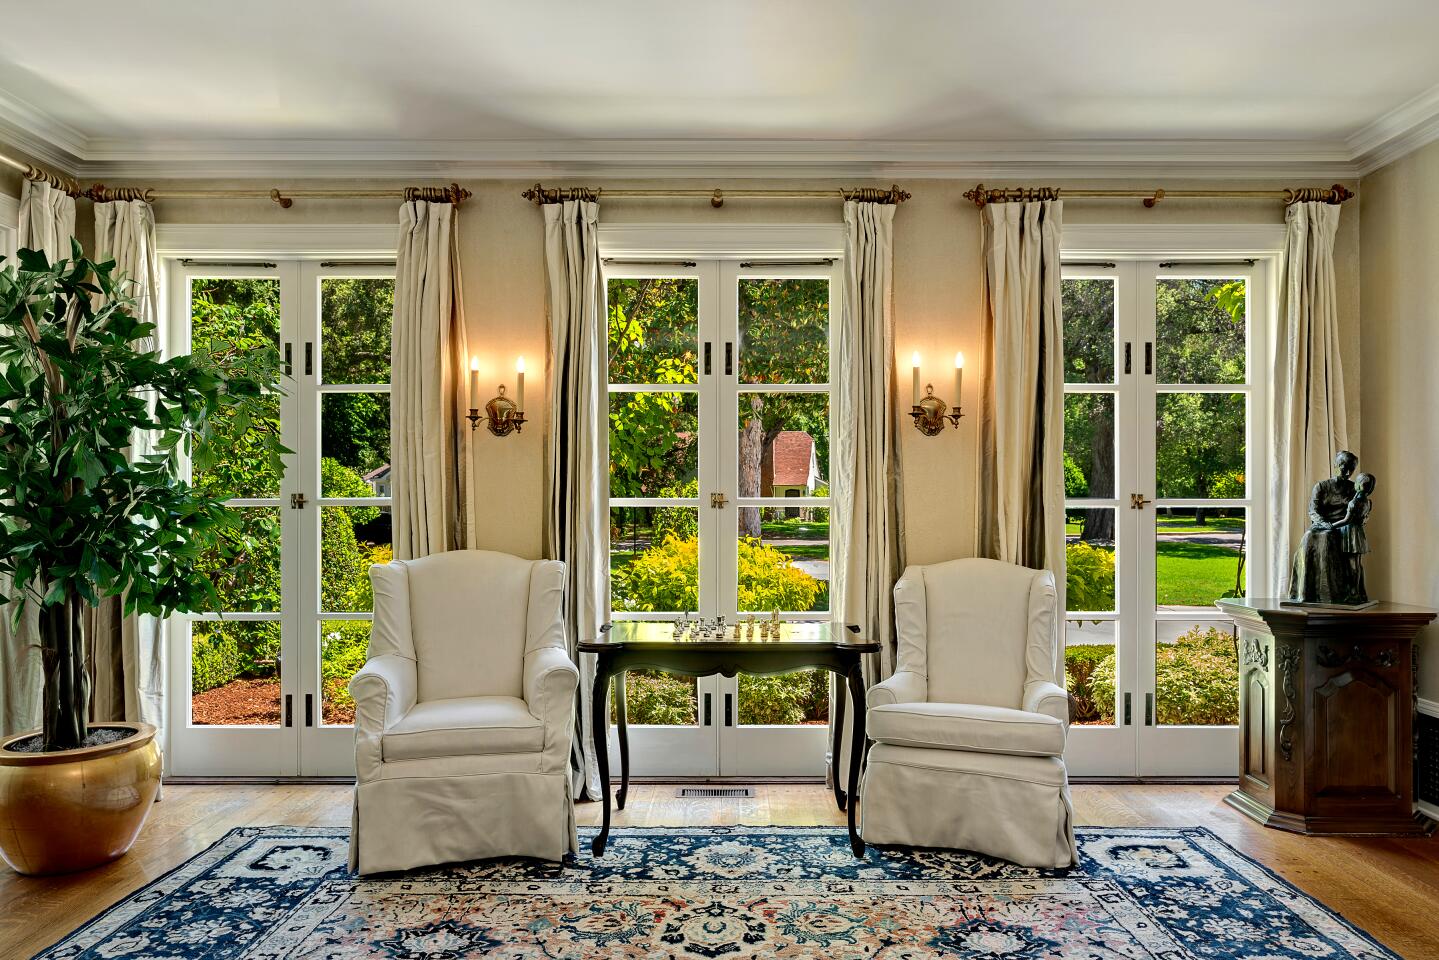 The four-bedroom, five-bathroom Colonial retains an aura of gracious living.